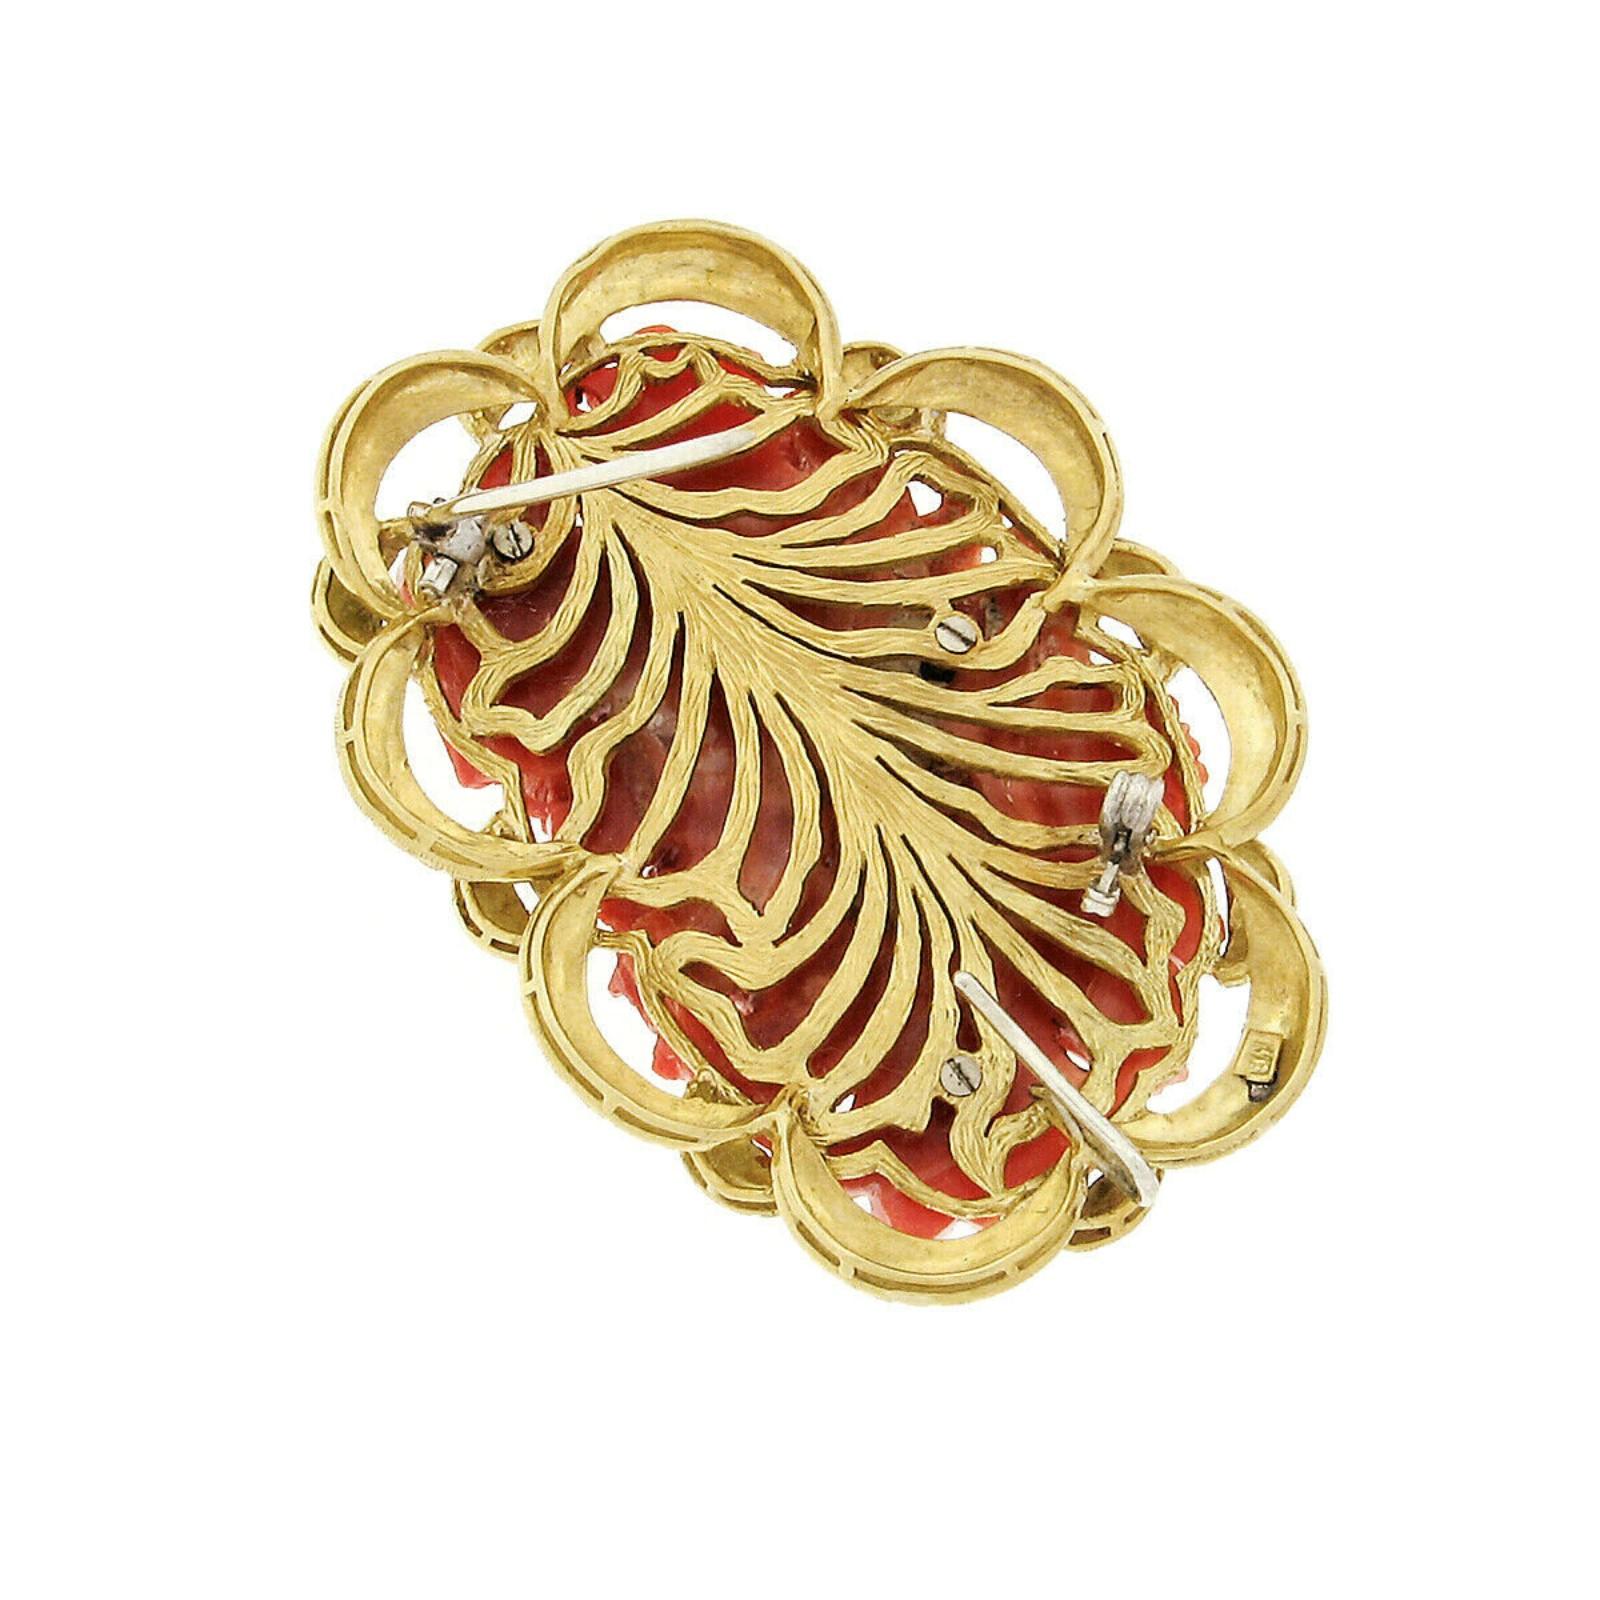 Uncut Large GIA No Dye Carved Red Coral Brooch with Hand Engraved 18 Karat Gold Frame For Sale